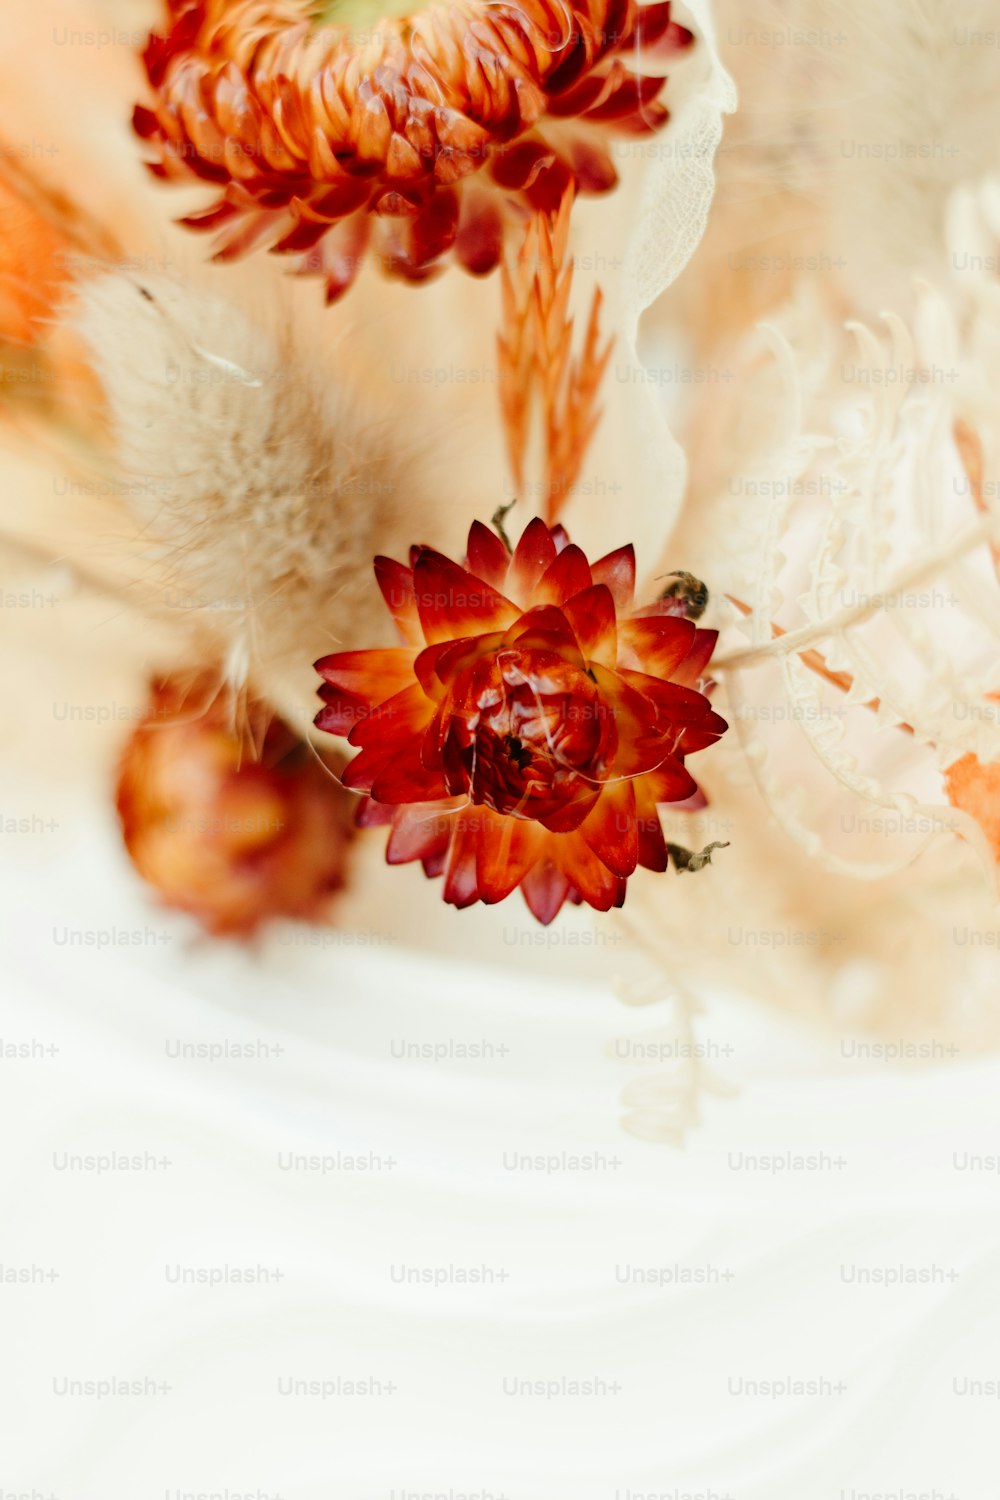 a close up of a red flower on a white plate